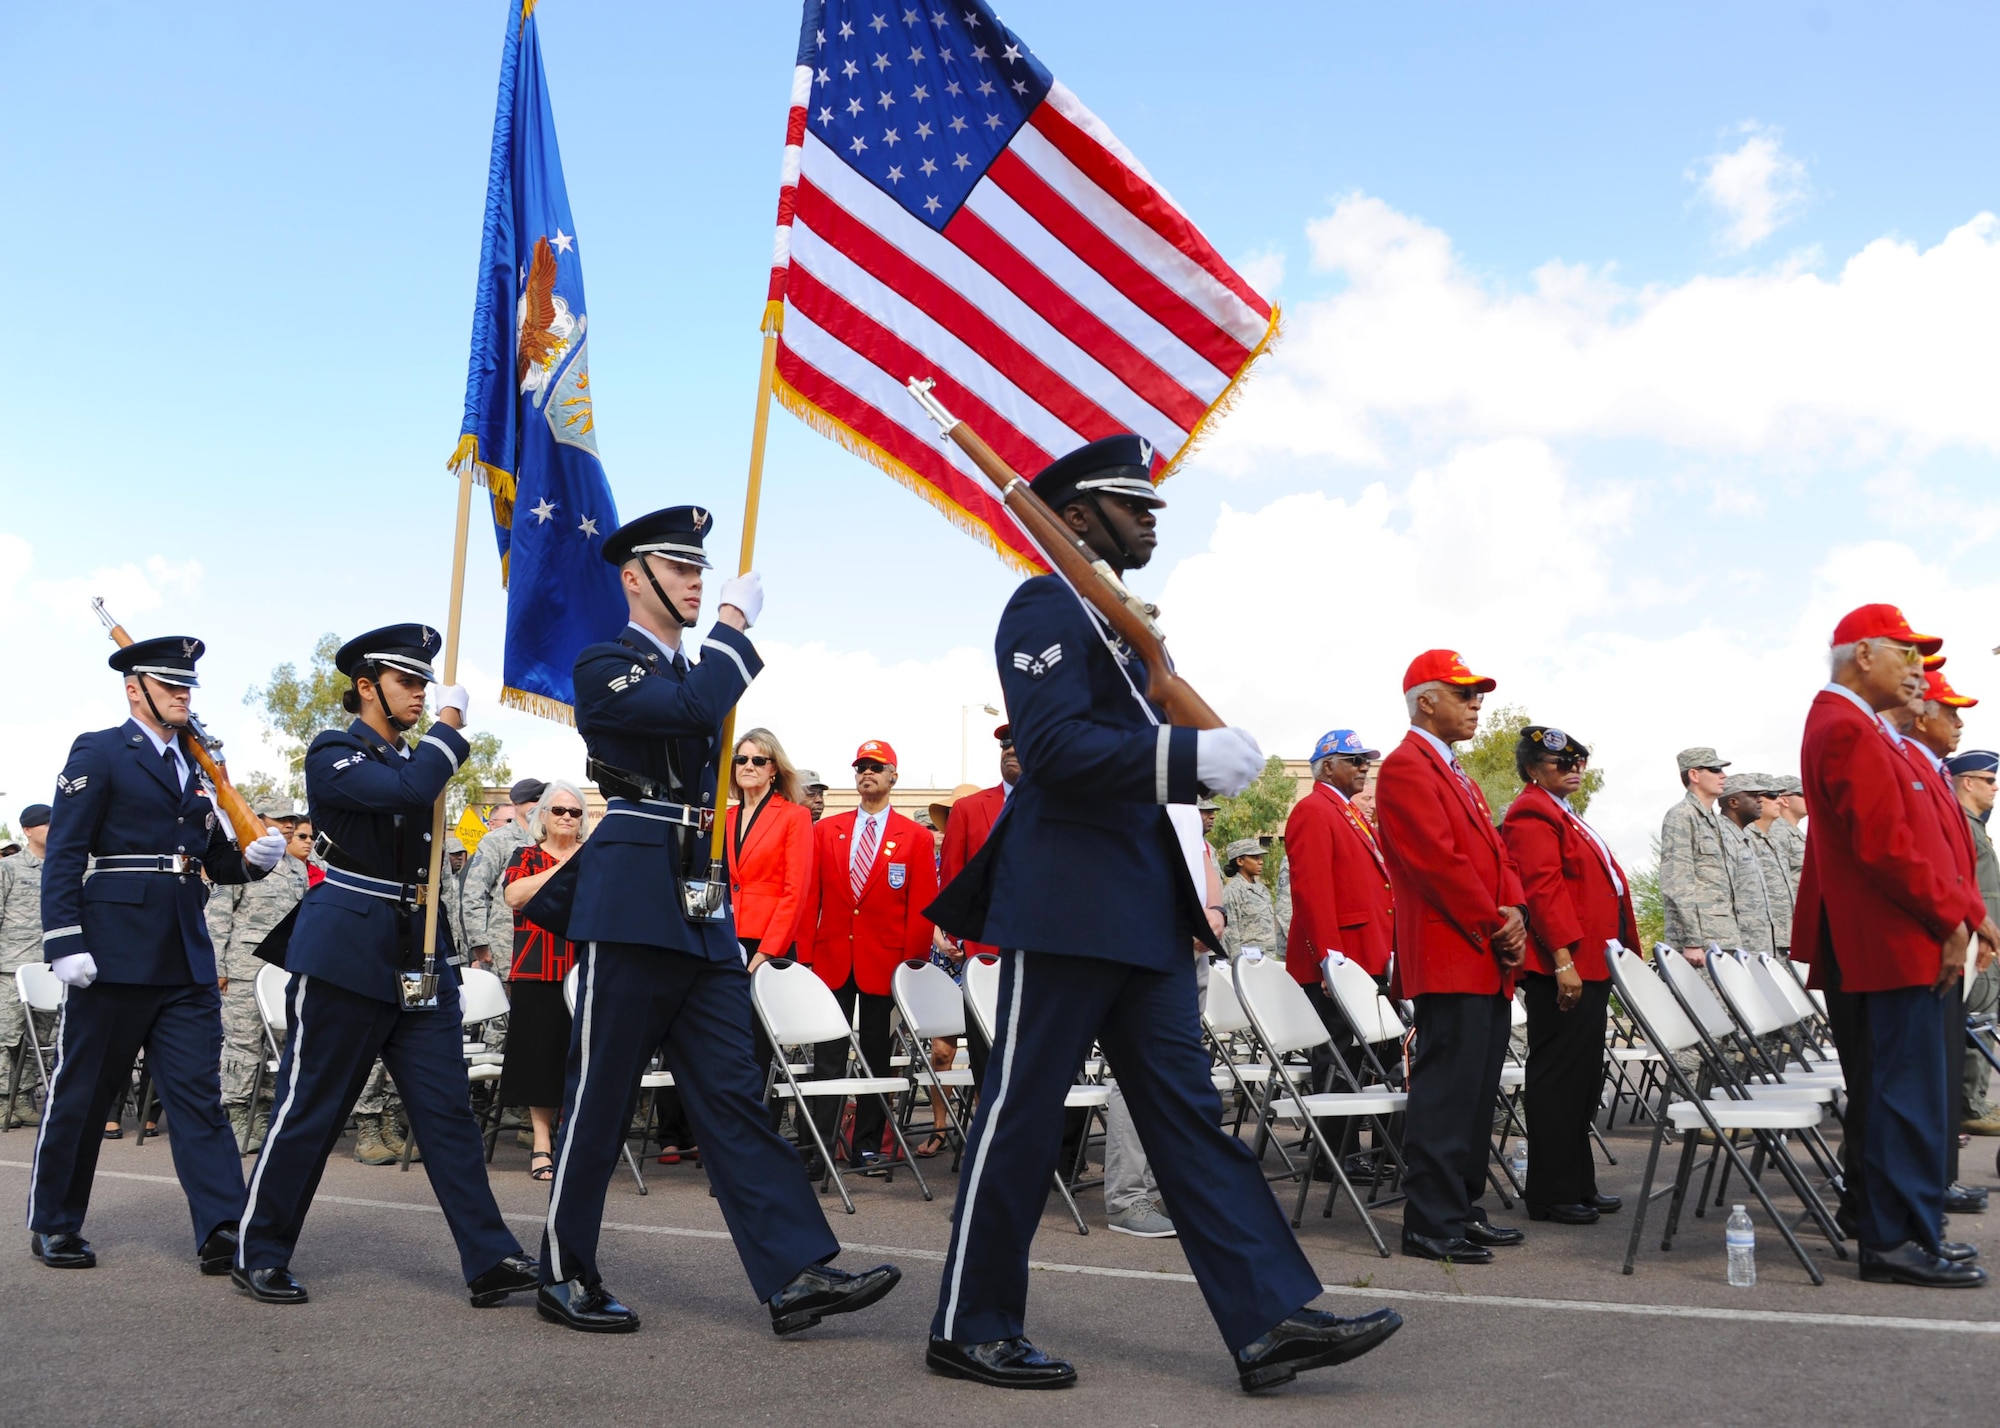 Luke Honor Guard members march into the Fourth Annual Commemoration Day for the Tuskegee Airmen March 23, 2017, at Luke Air Force Base, Ariz. A presentation of colors, playing of taps and the laying of a wreath was all part of the ceremony commemorating the Tuskegee Airmen. (U.S. Air Force photo by Airman 1st Class Caleb Worpel)